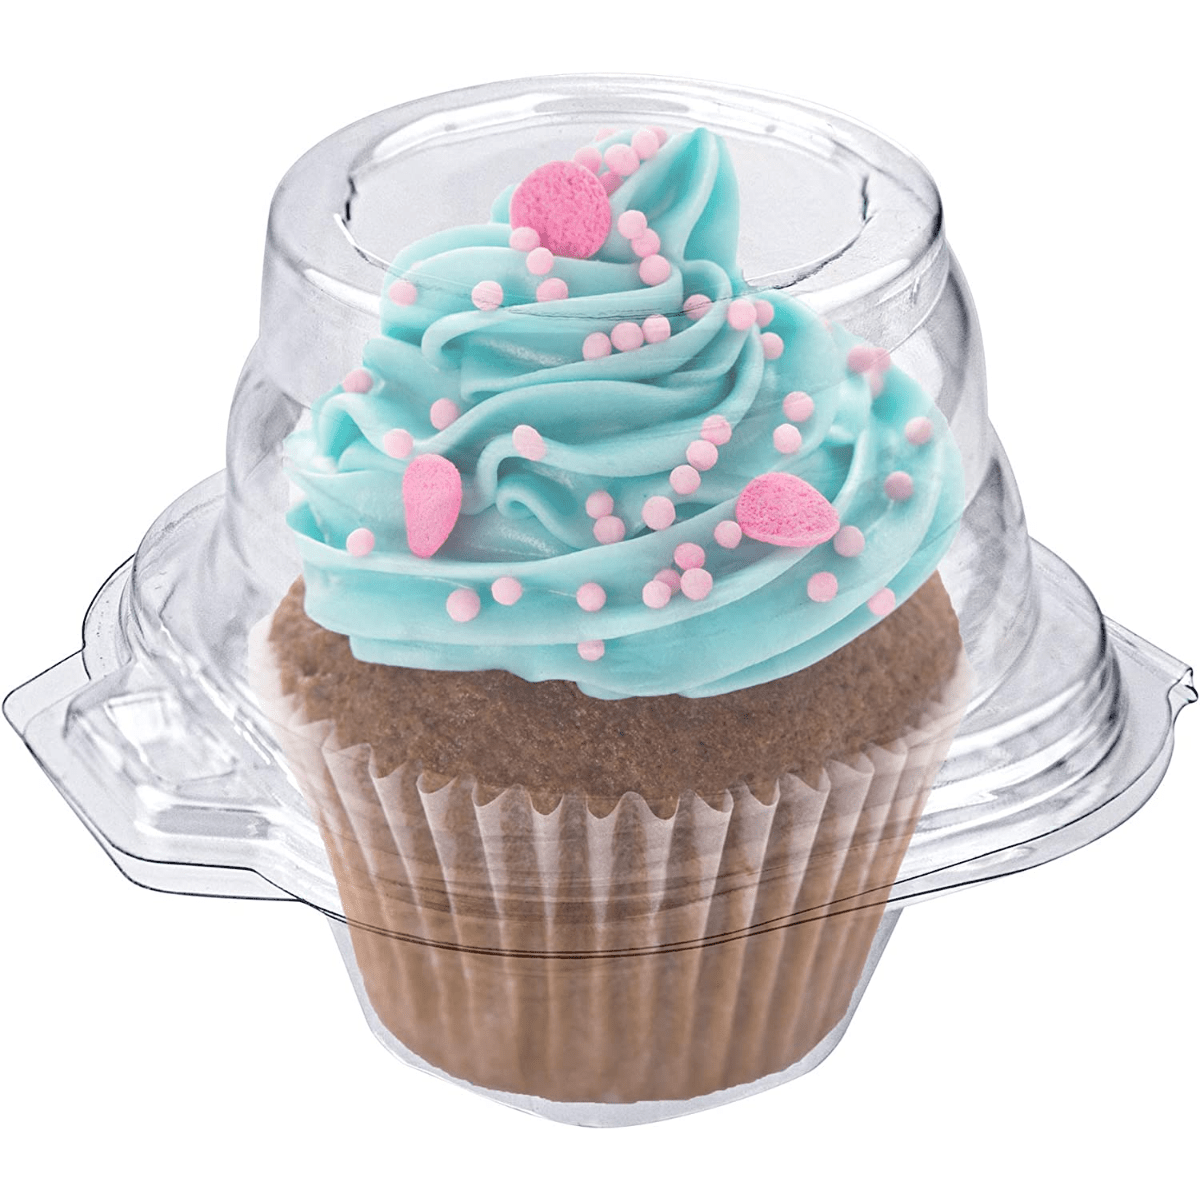 Cupcake Containers With Connected Airtight Dome Lids, Snack